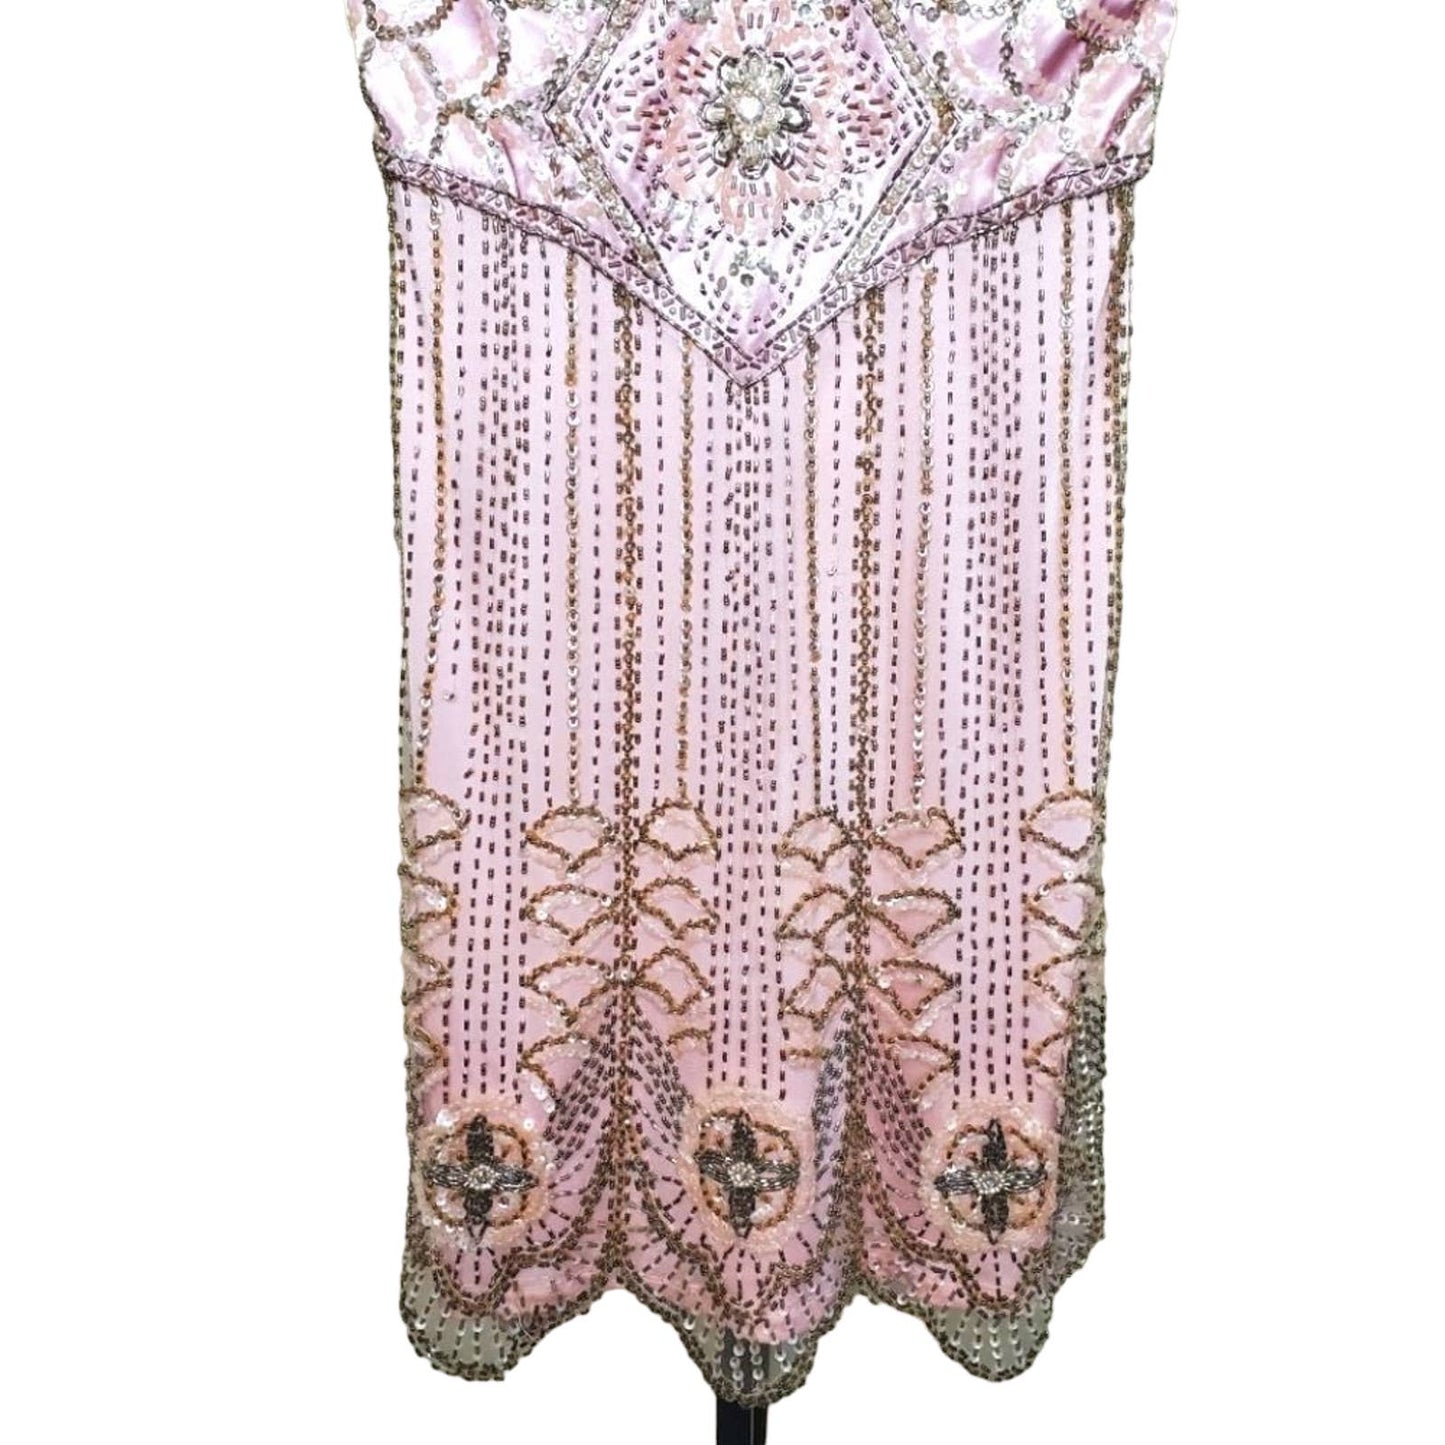 NEW Sue Wong Nocturne Beaded Embroidered Dress, Pink, Size 2